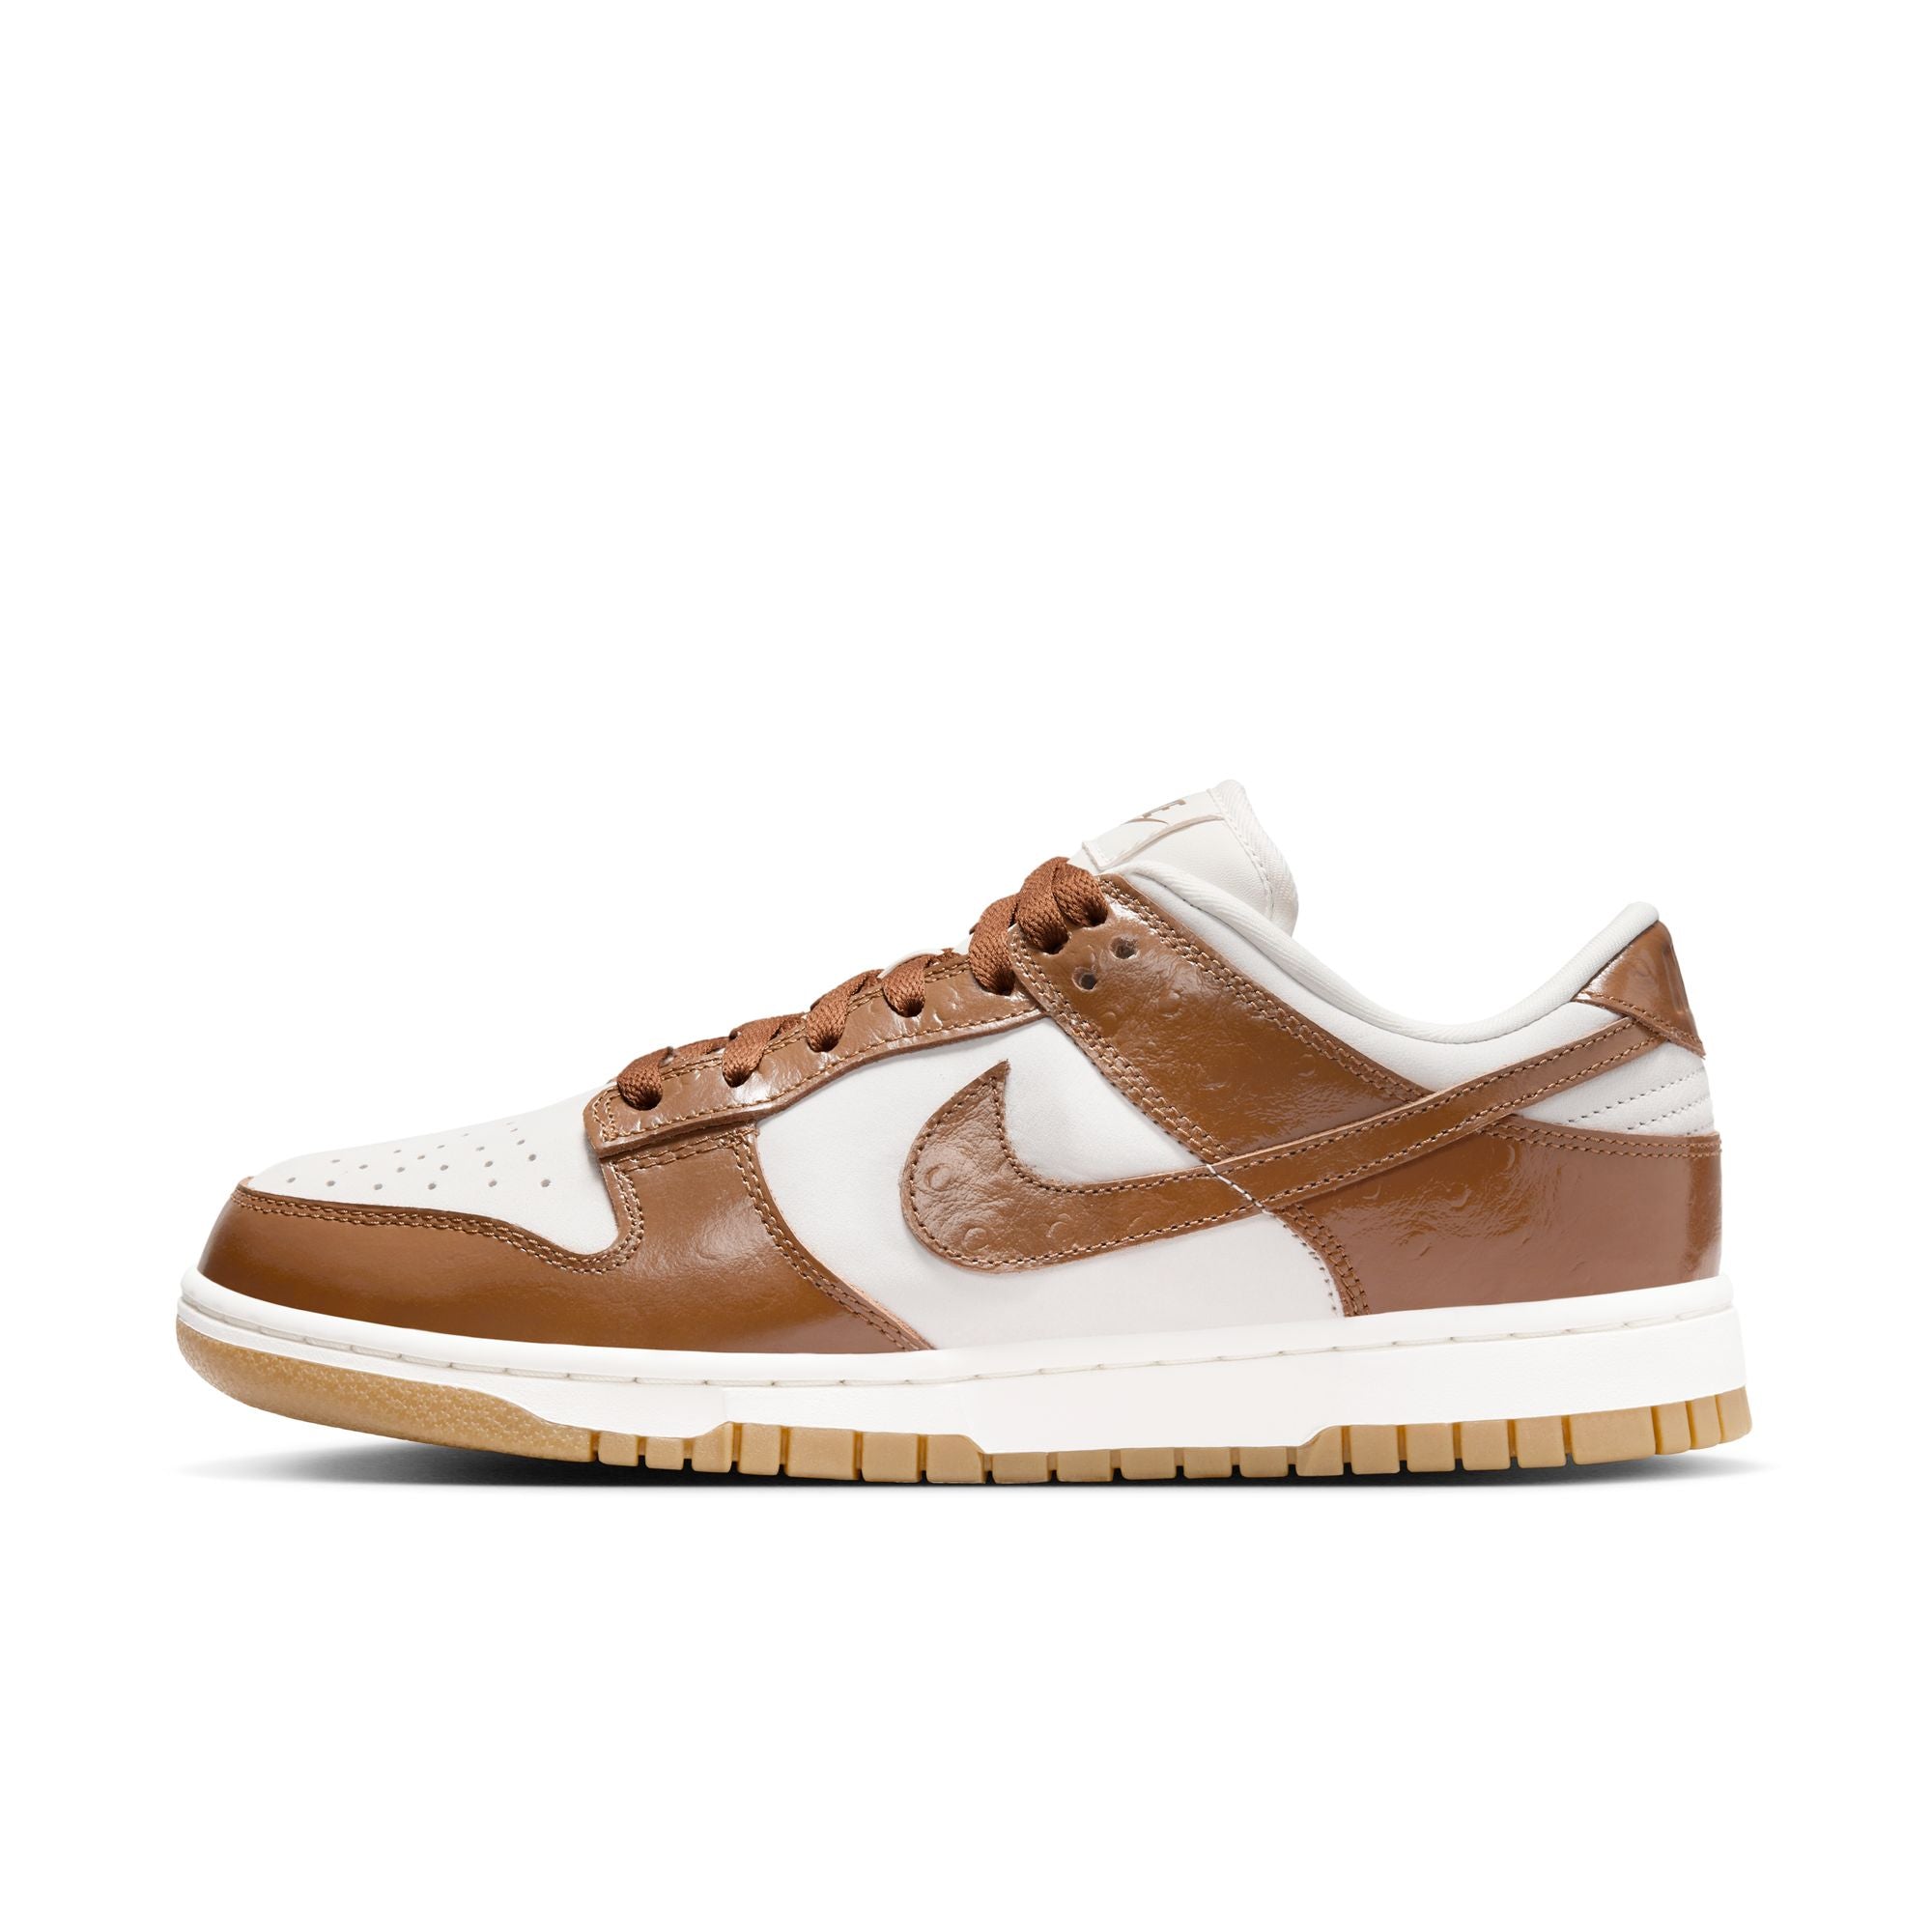 Women's Nike Footwear - Civilized Nation - Official Site